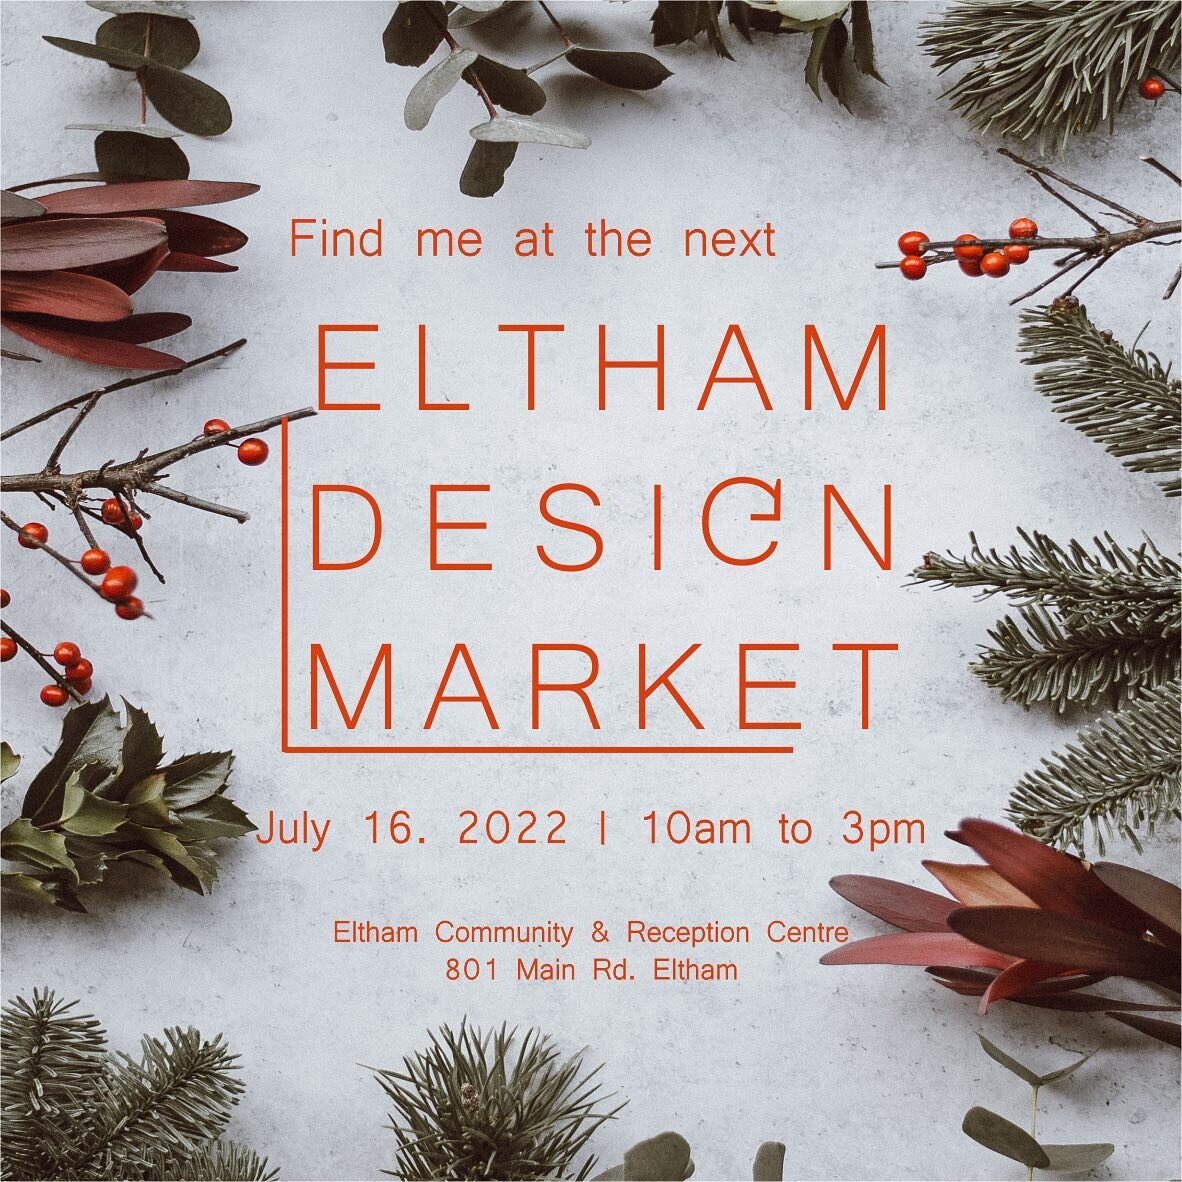 In about a week I will be @elthamdesignmarket with all my lovely homemade wares. 

Saturday July 16th

10am - 3pm

The best part is it&rsquo;s all undercover ☔️ 

Can&rsquo;t wait to see you there. I will have prints, tea towels, totes and some origi